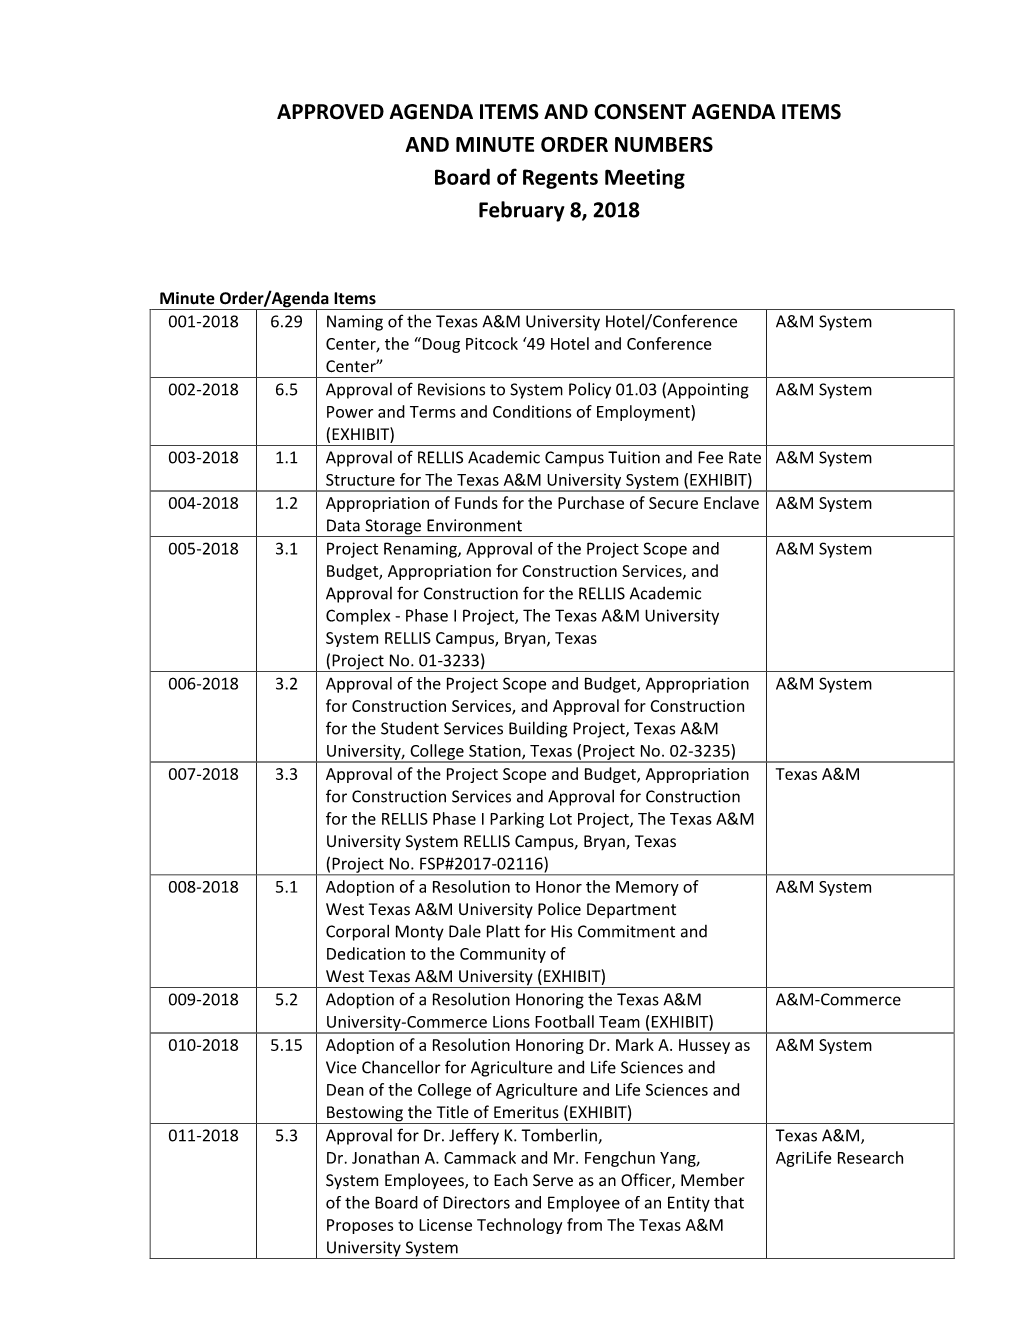 APPROVED AGENDA ITEMS and CONSENT AGENDA ITEMS and MINUTE ORDER NUMBERS Board of Regents Meeting February 8, 2018